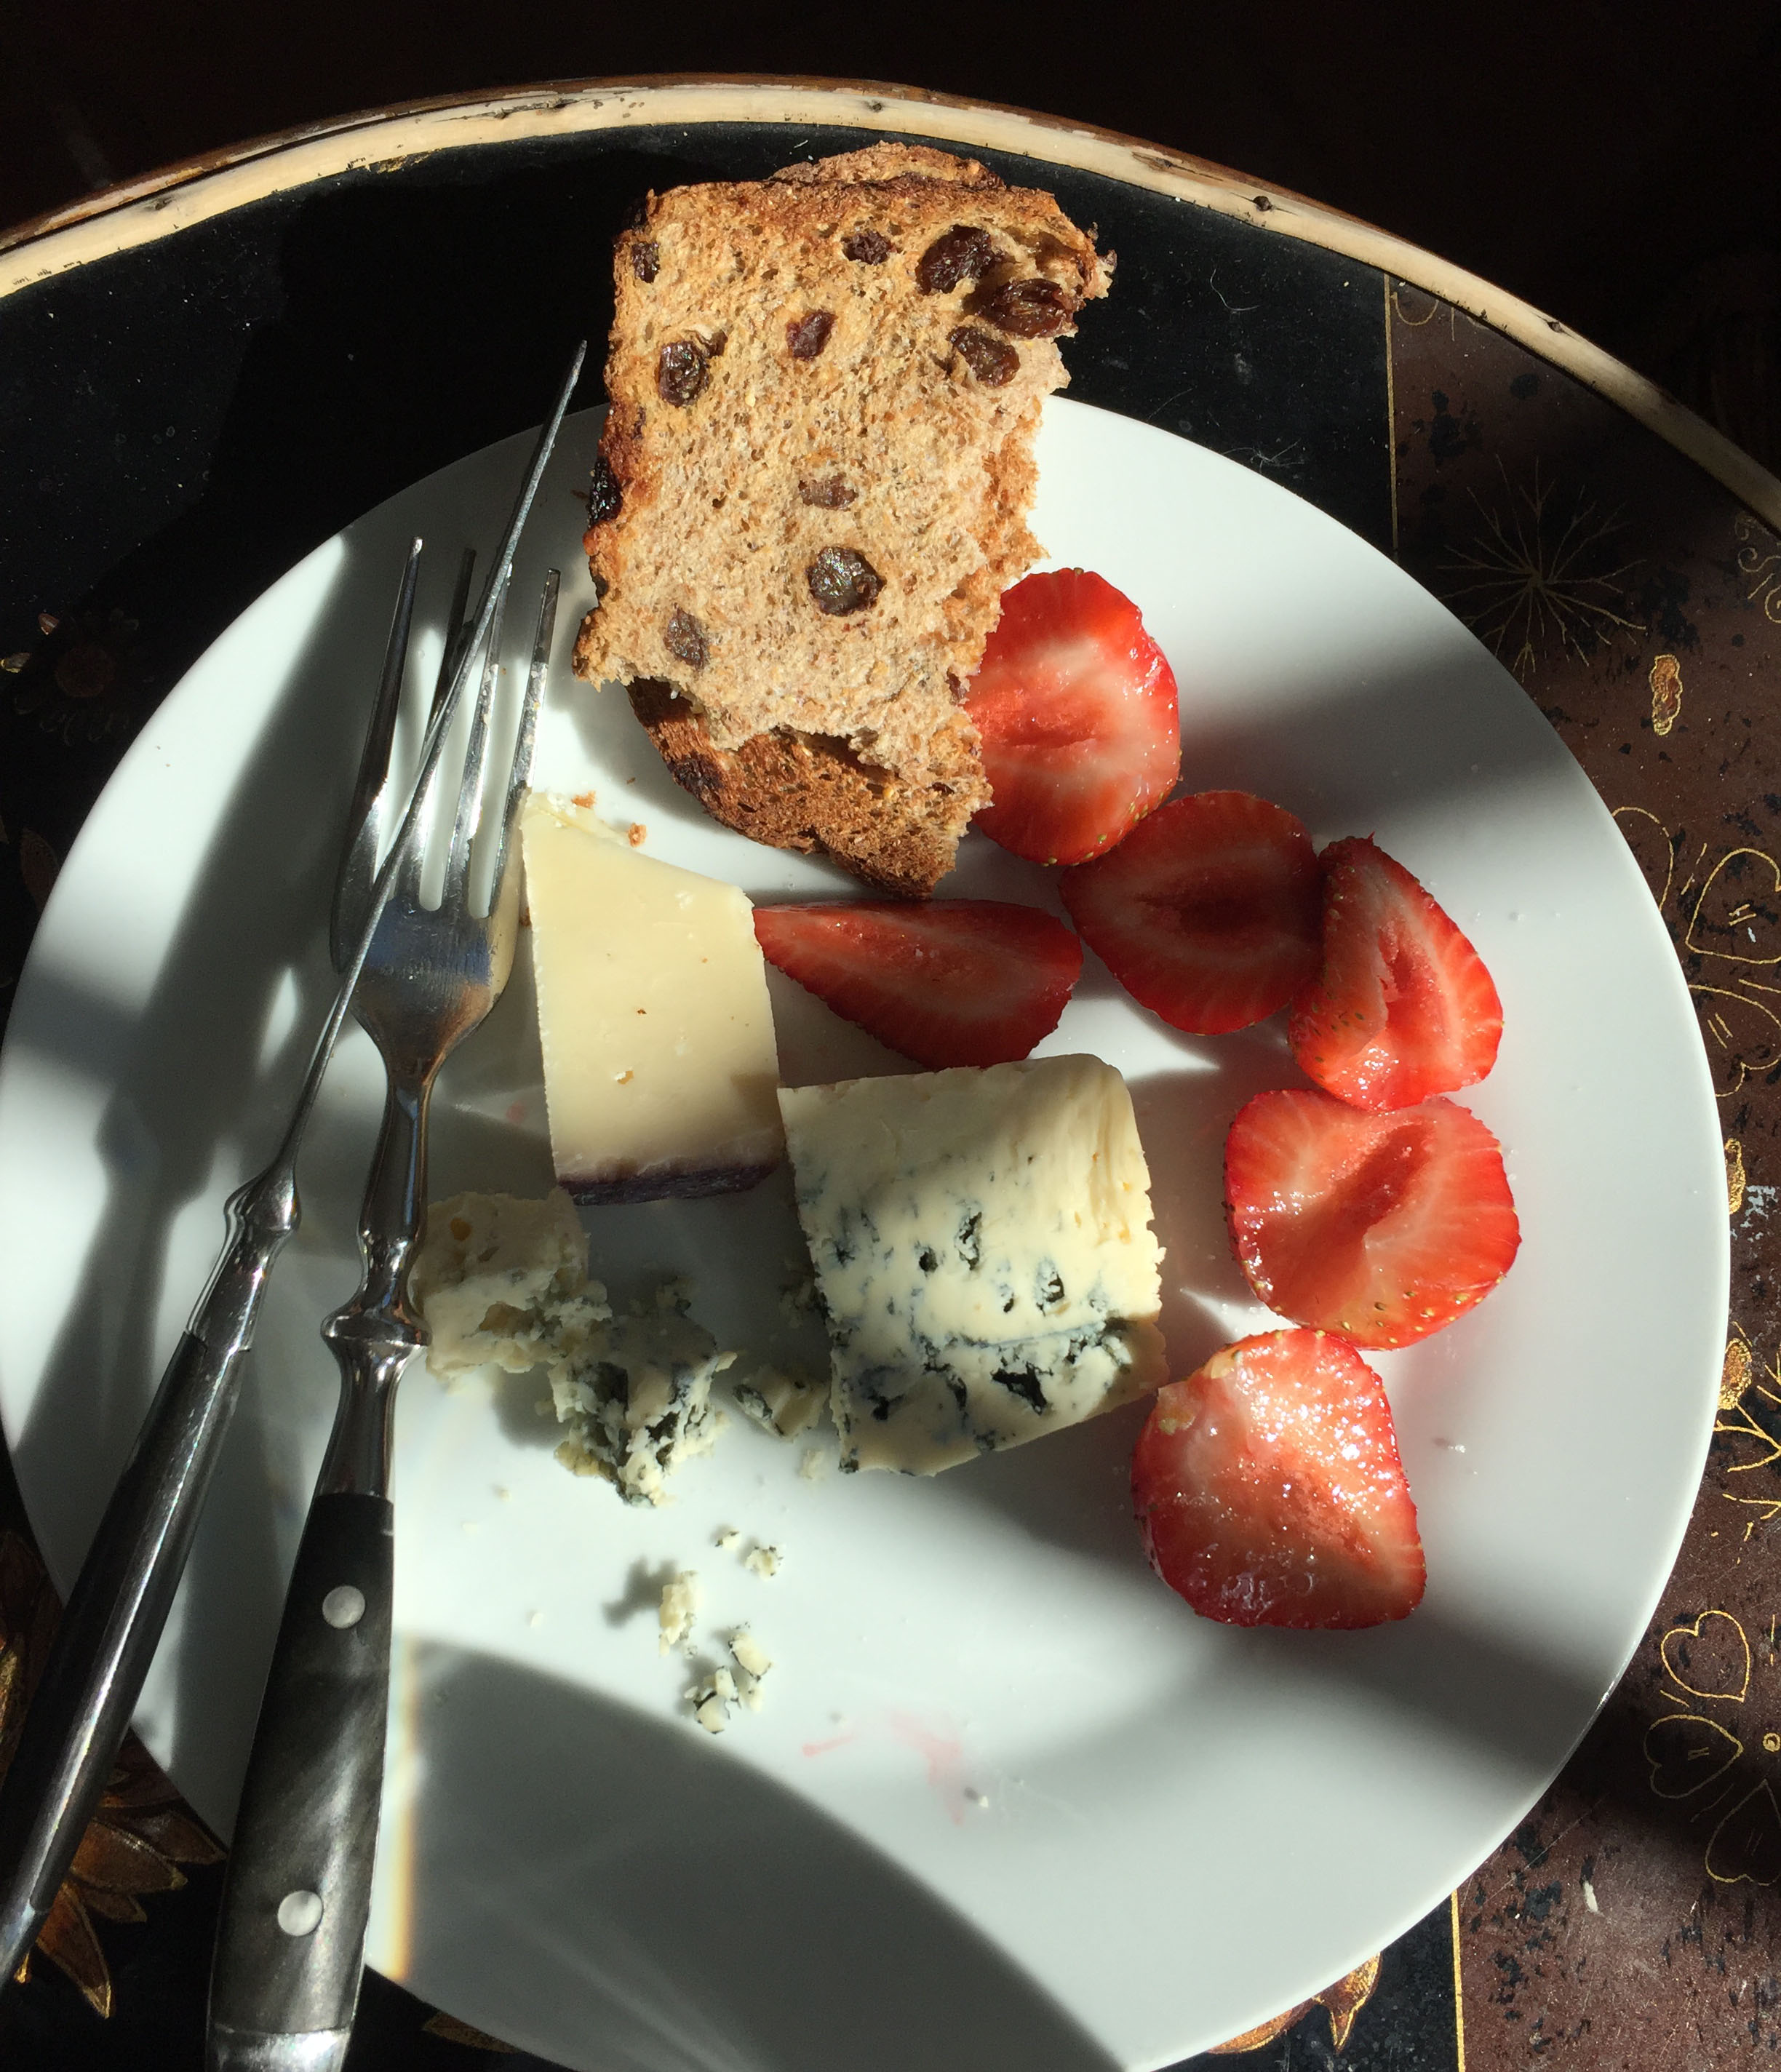 Cheese Plate with Raisin Bread & Strawberries